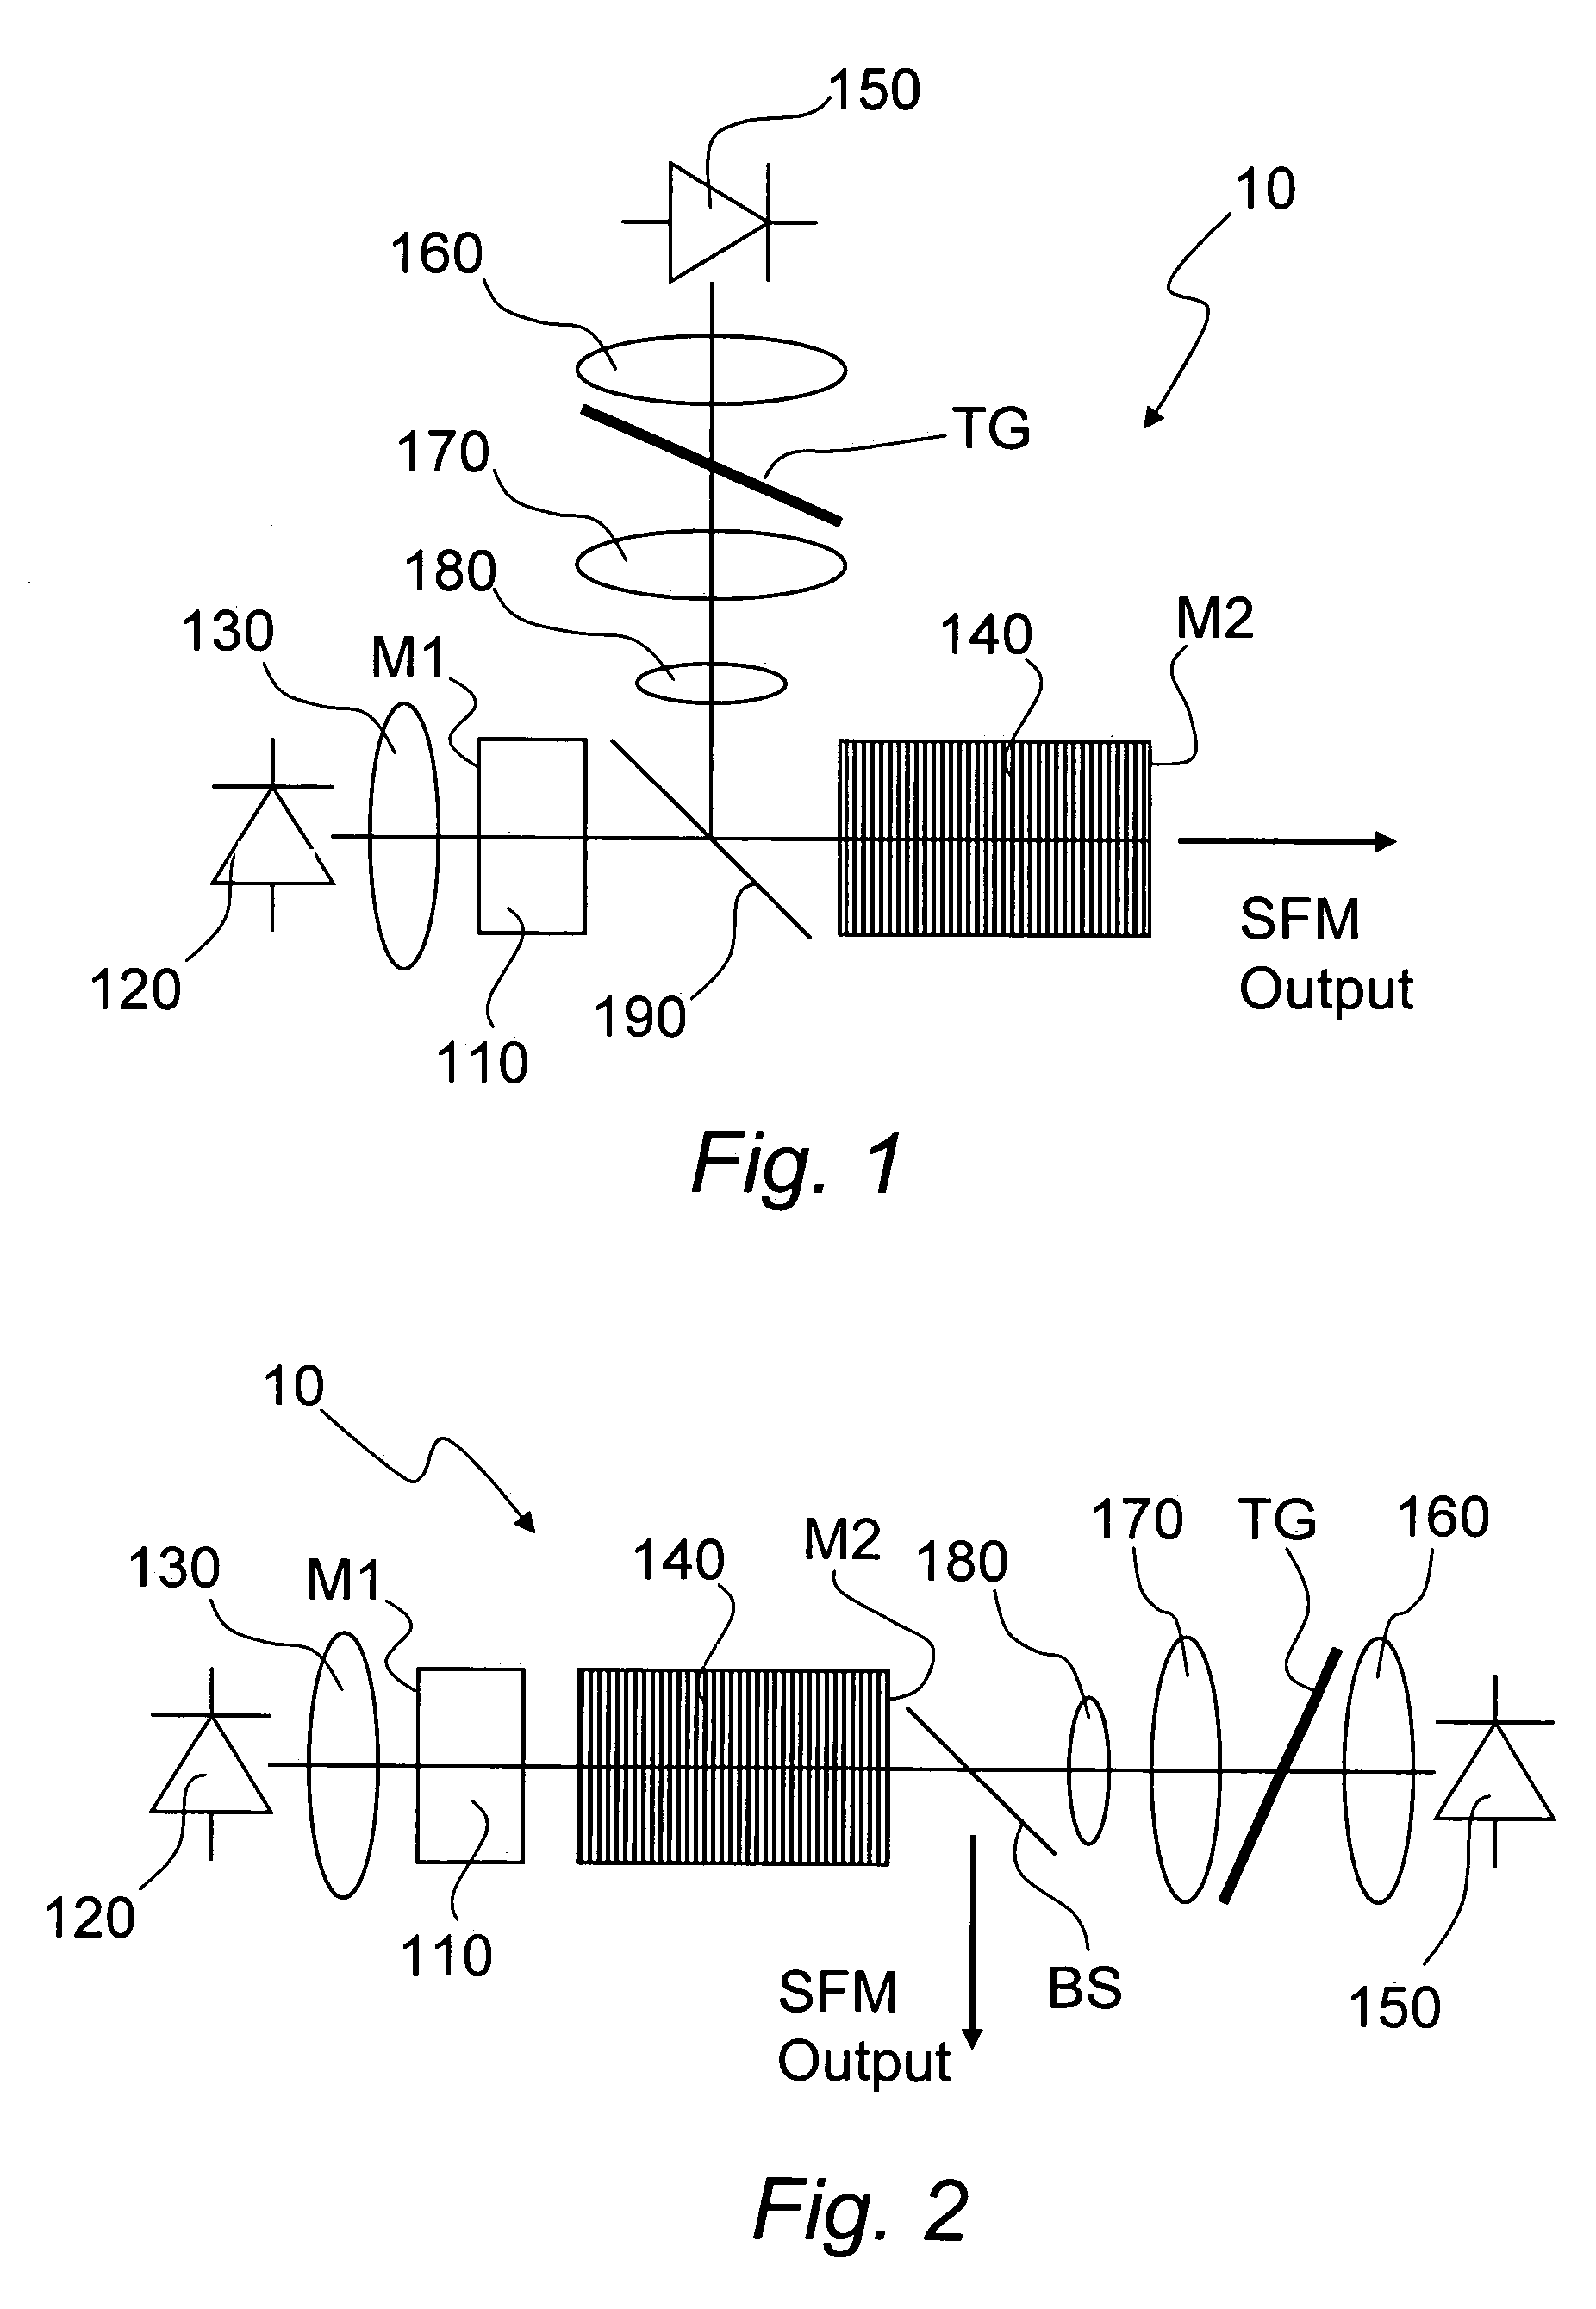 Coherent light source based on sum-frequency mixing